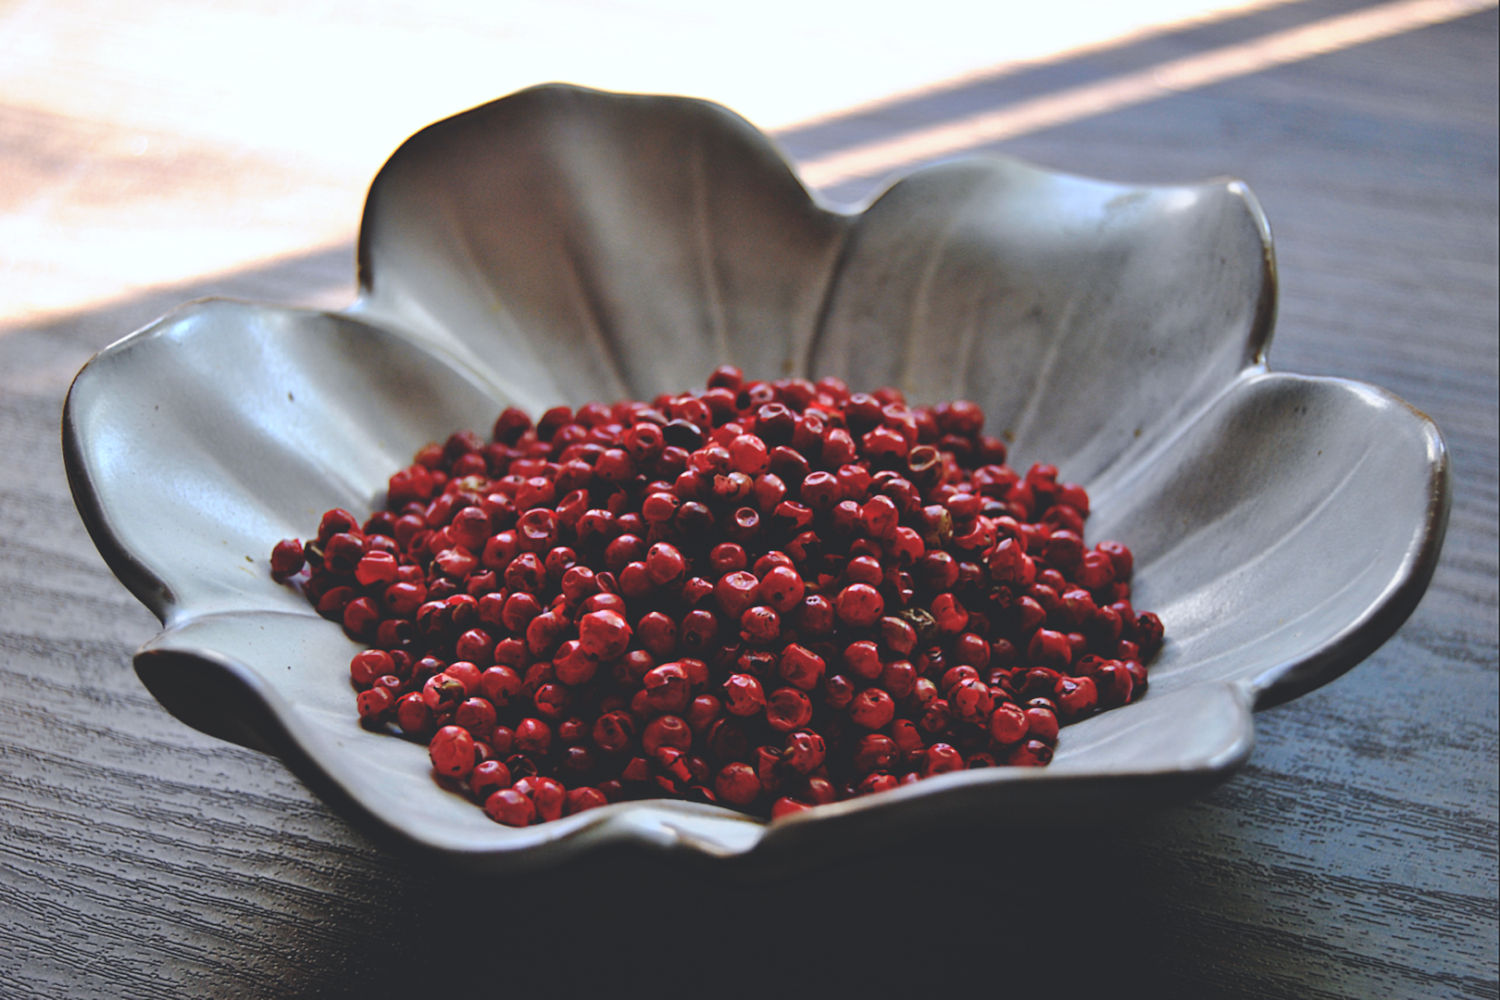 An assortment of pink peppercorns rests in a white, flower shaped dish on a wooden surface.